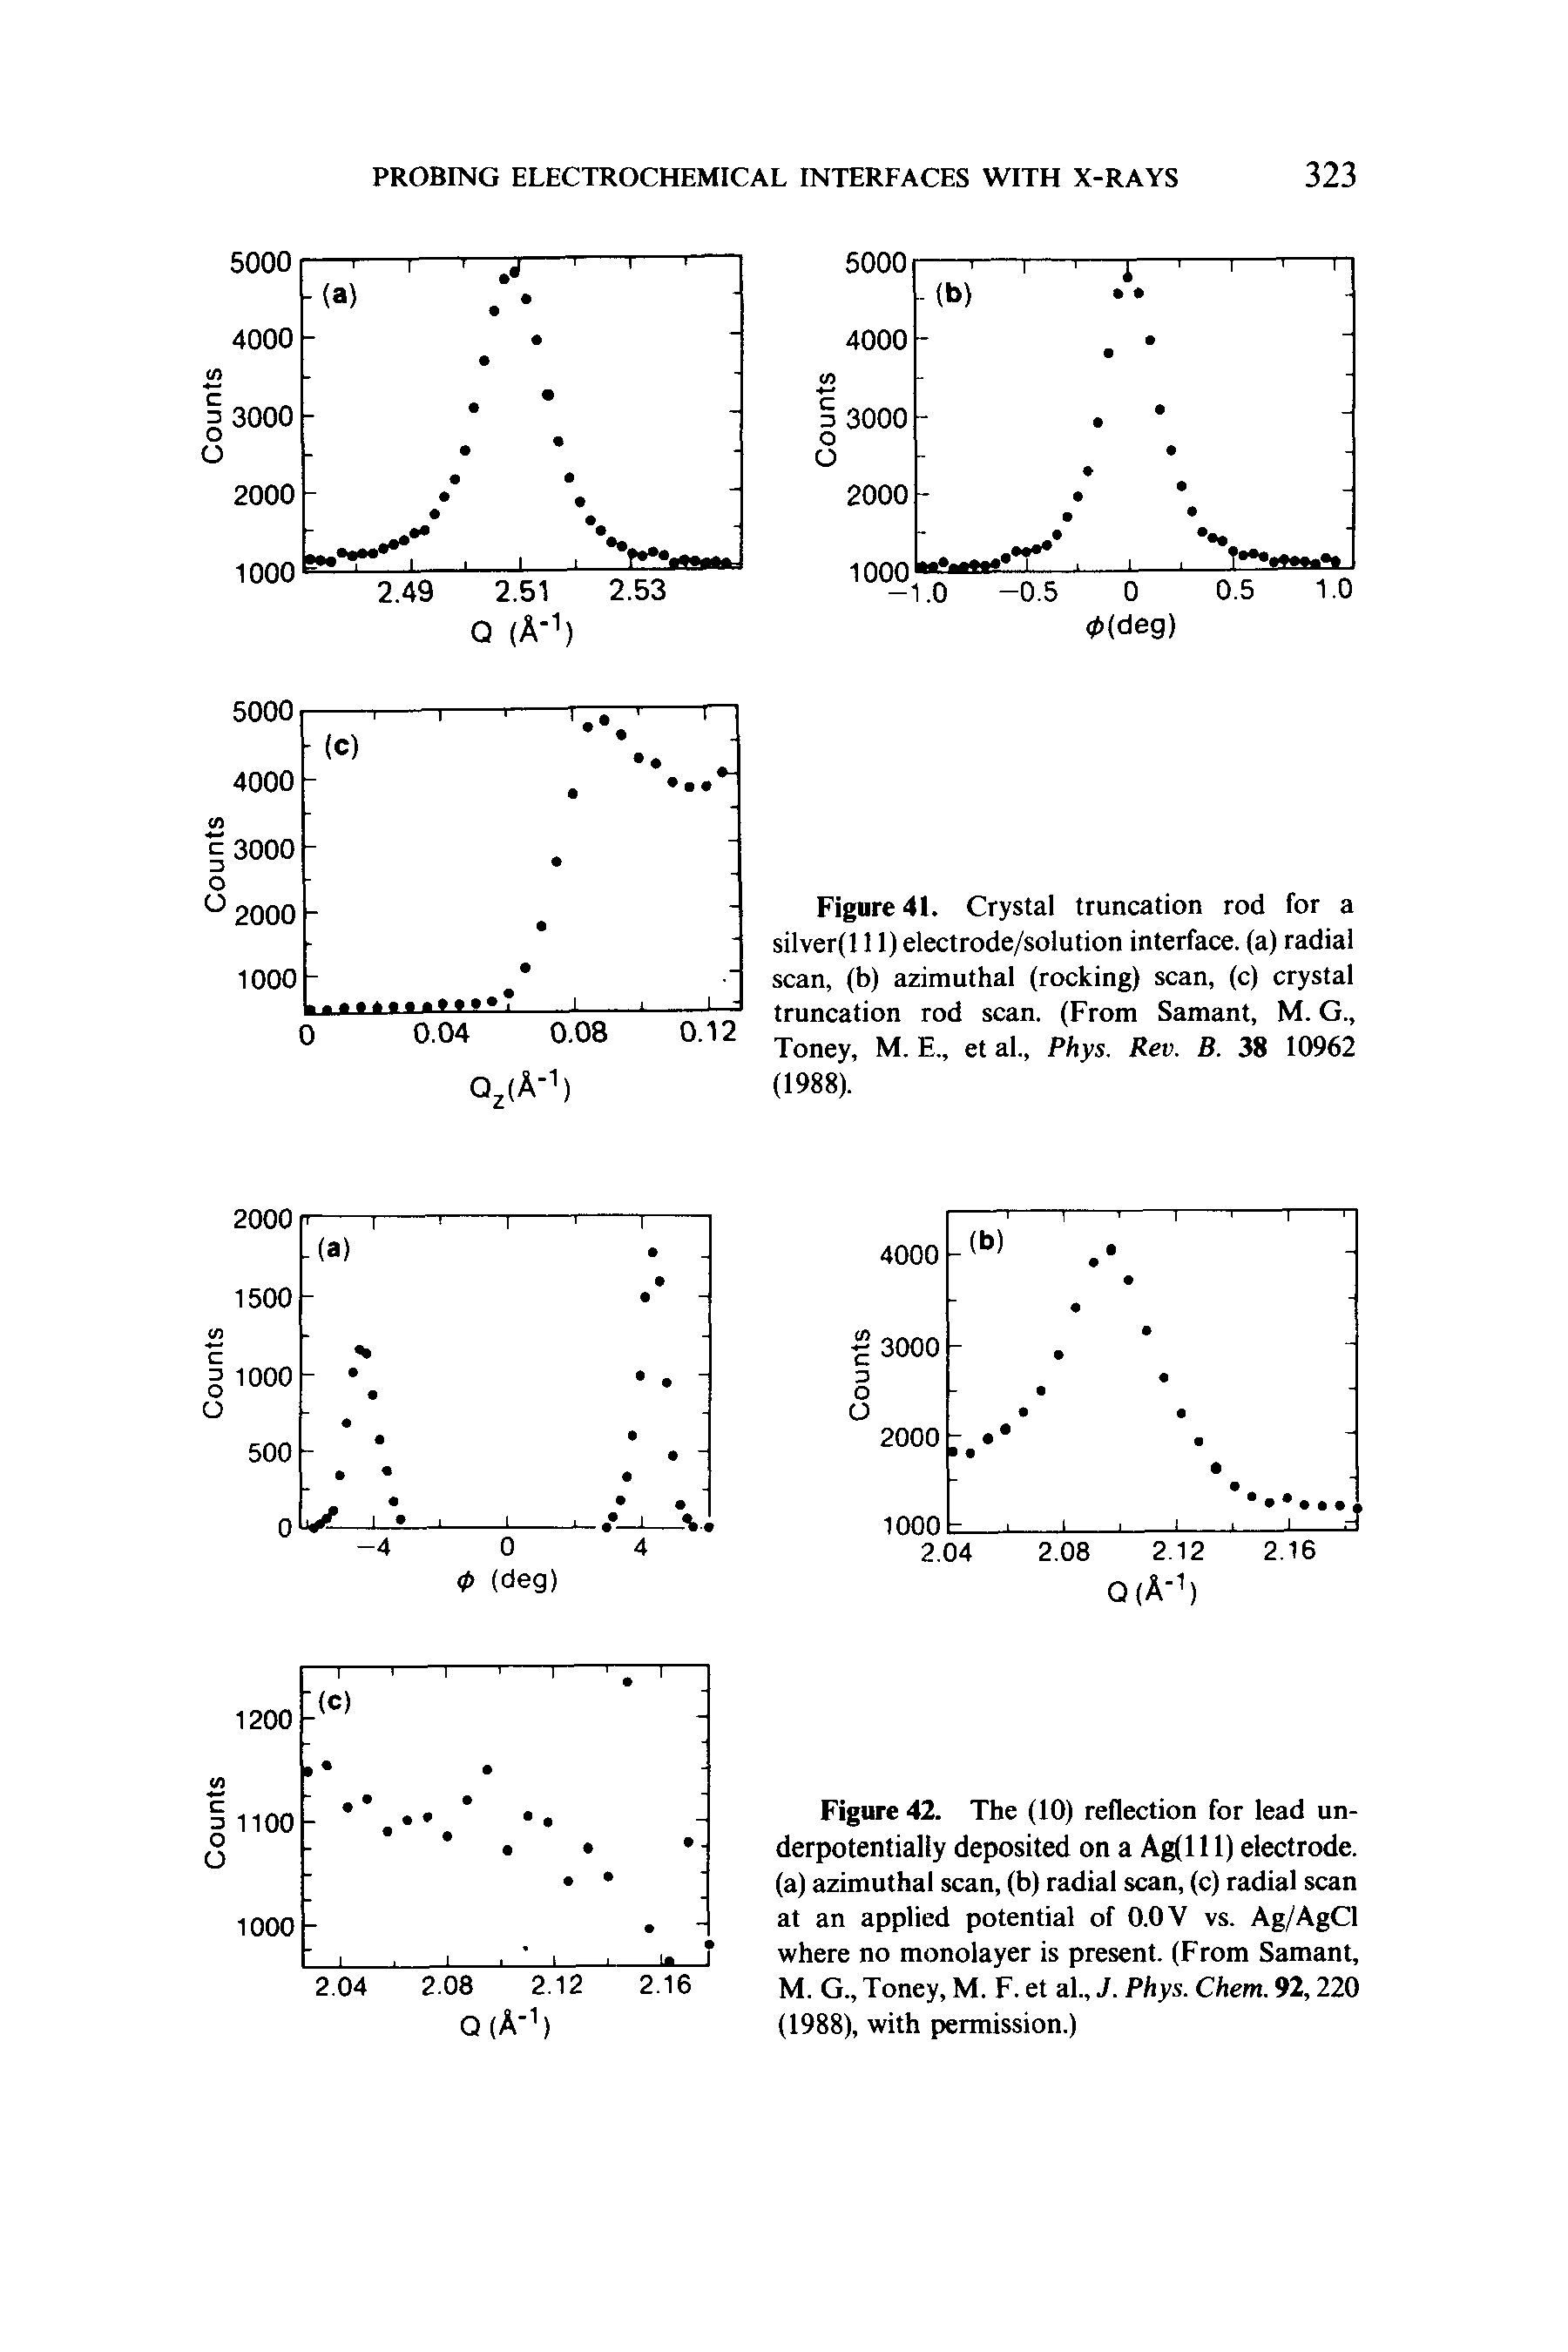 Figure 42. The (10) reflection for lead un-derpotentially deposited on a Ag(l 11) electrode, (a) azimuthal scan, (b) radial scan, (c) radial scan at an applied potential of 0.0 V vs. Ag/AgCl where no monolayer is present. (From Samant, M. G., Toney, M. F. et al., J. Phys. Chem. 92,220 (1988), with permission.)...